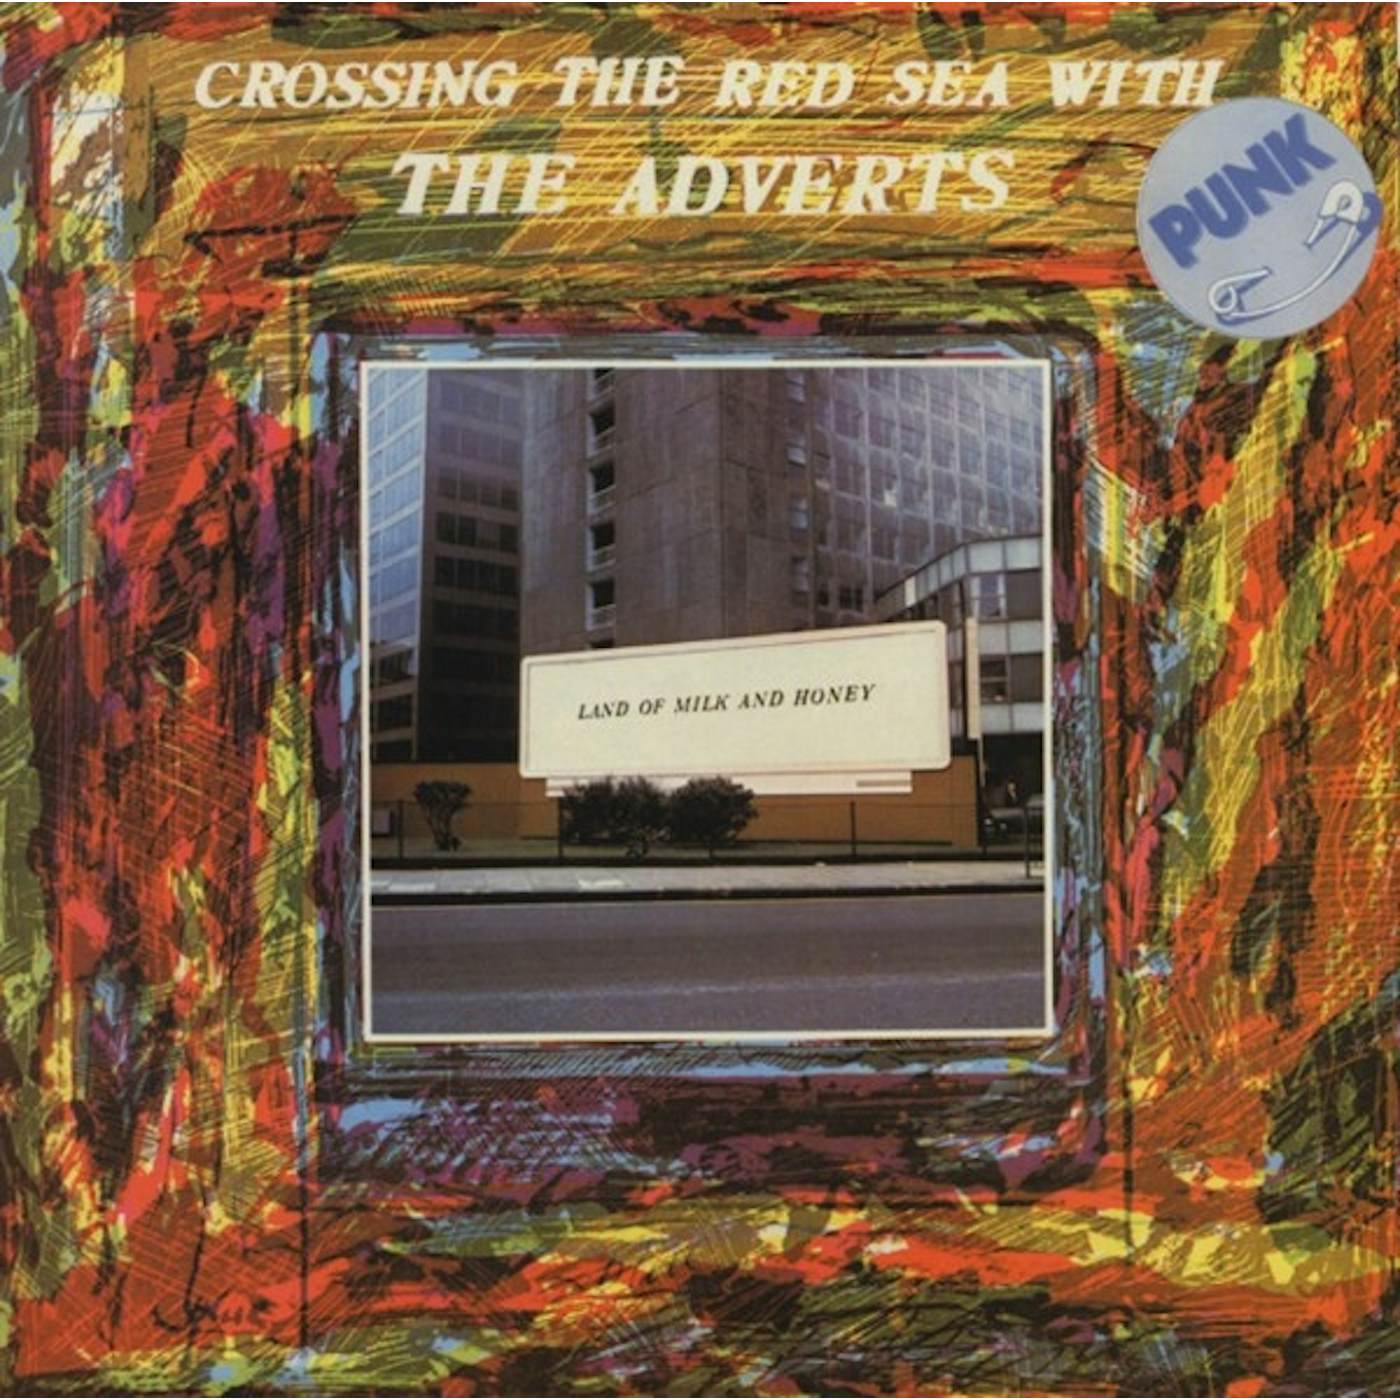 Crossing the Red Sea With the Adverts Vinyl Record